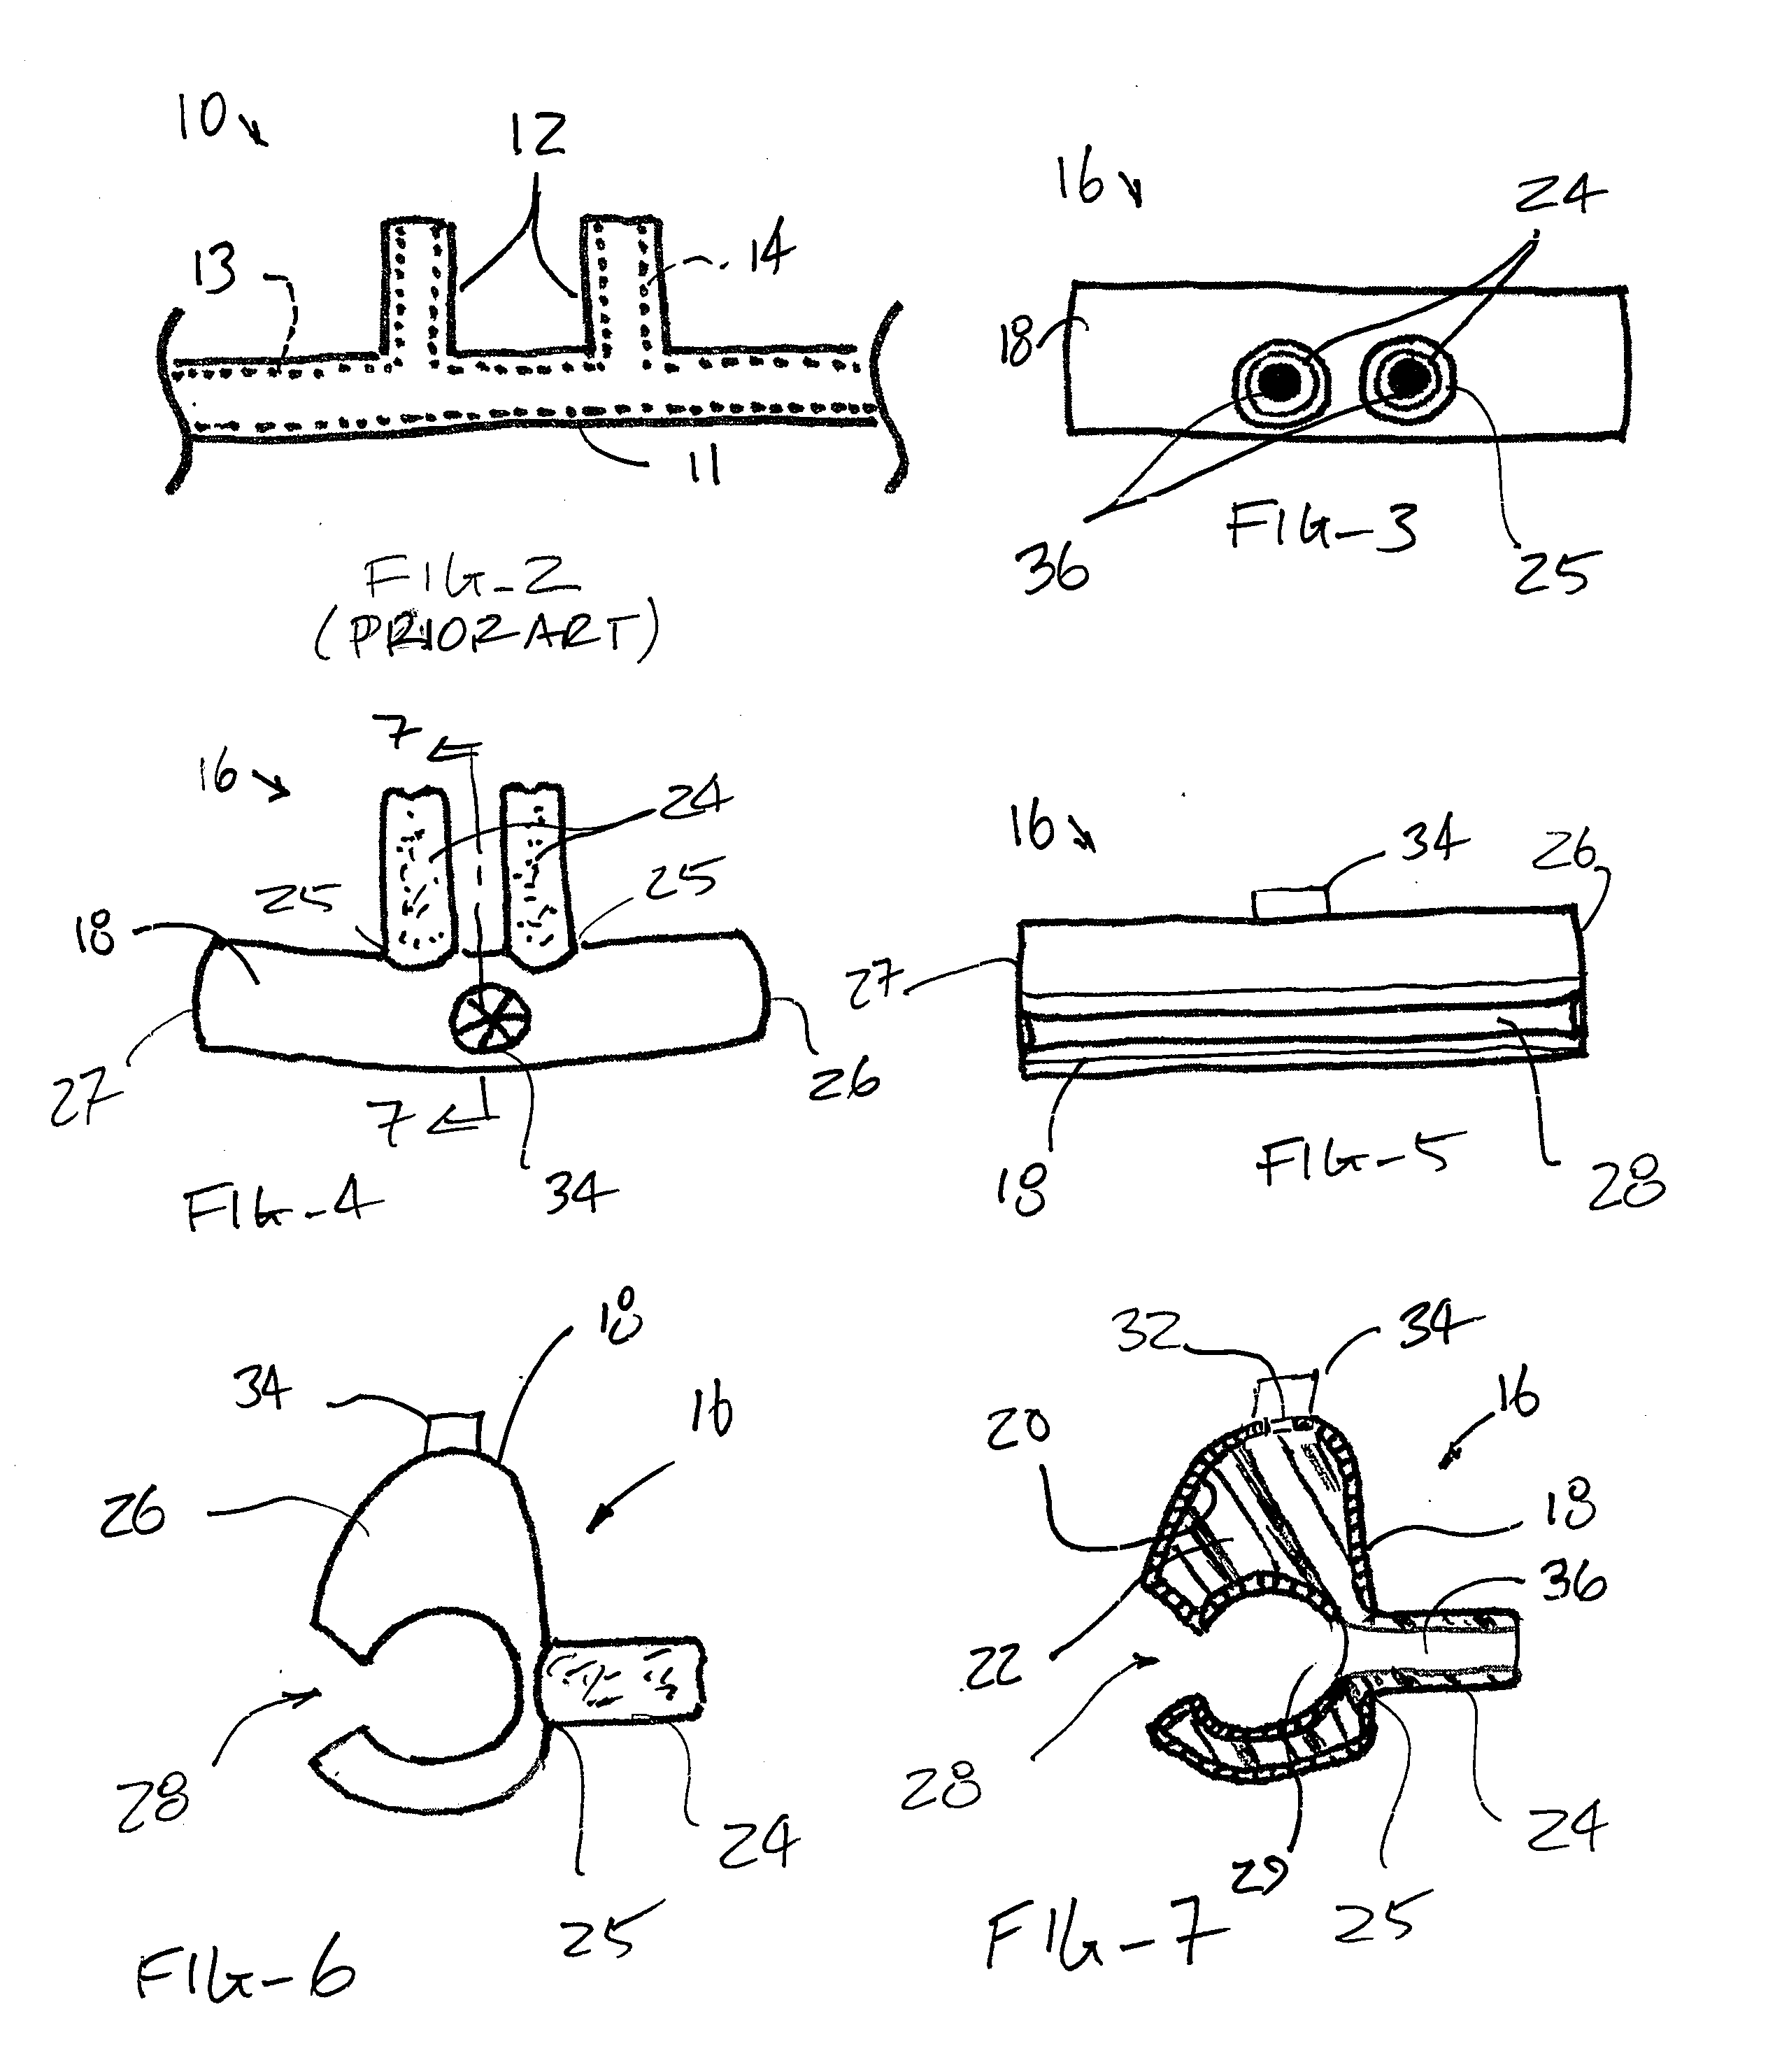 Clip-on nasal air humidifying and epistaxis-prevention device and methods for use with supplemental oxygen